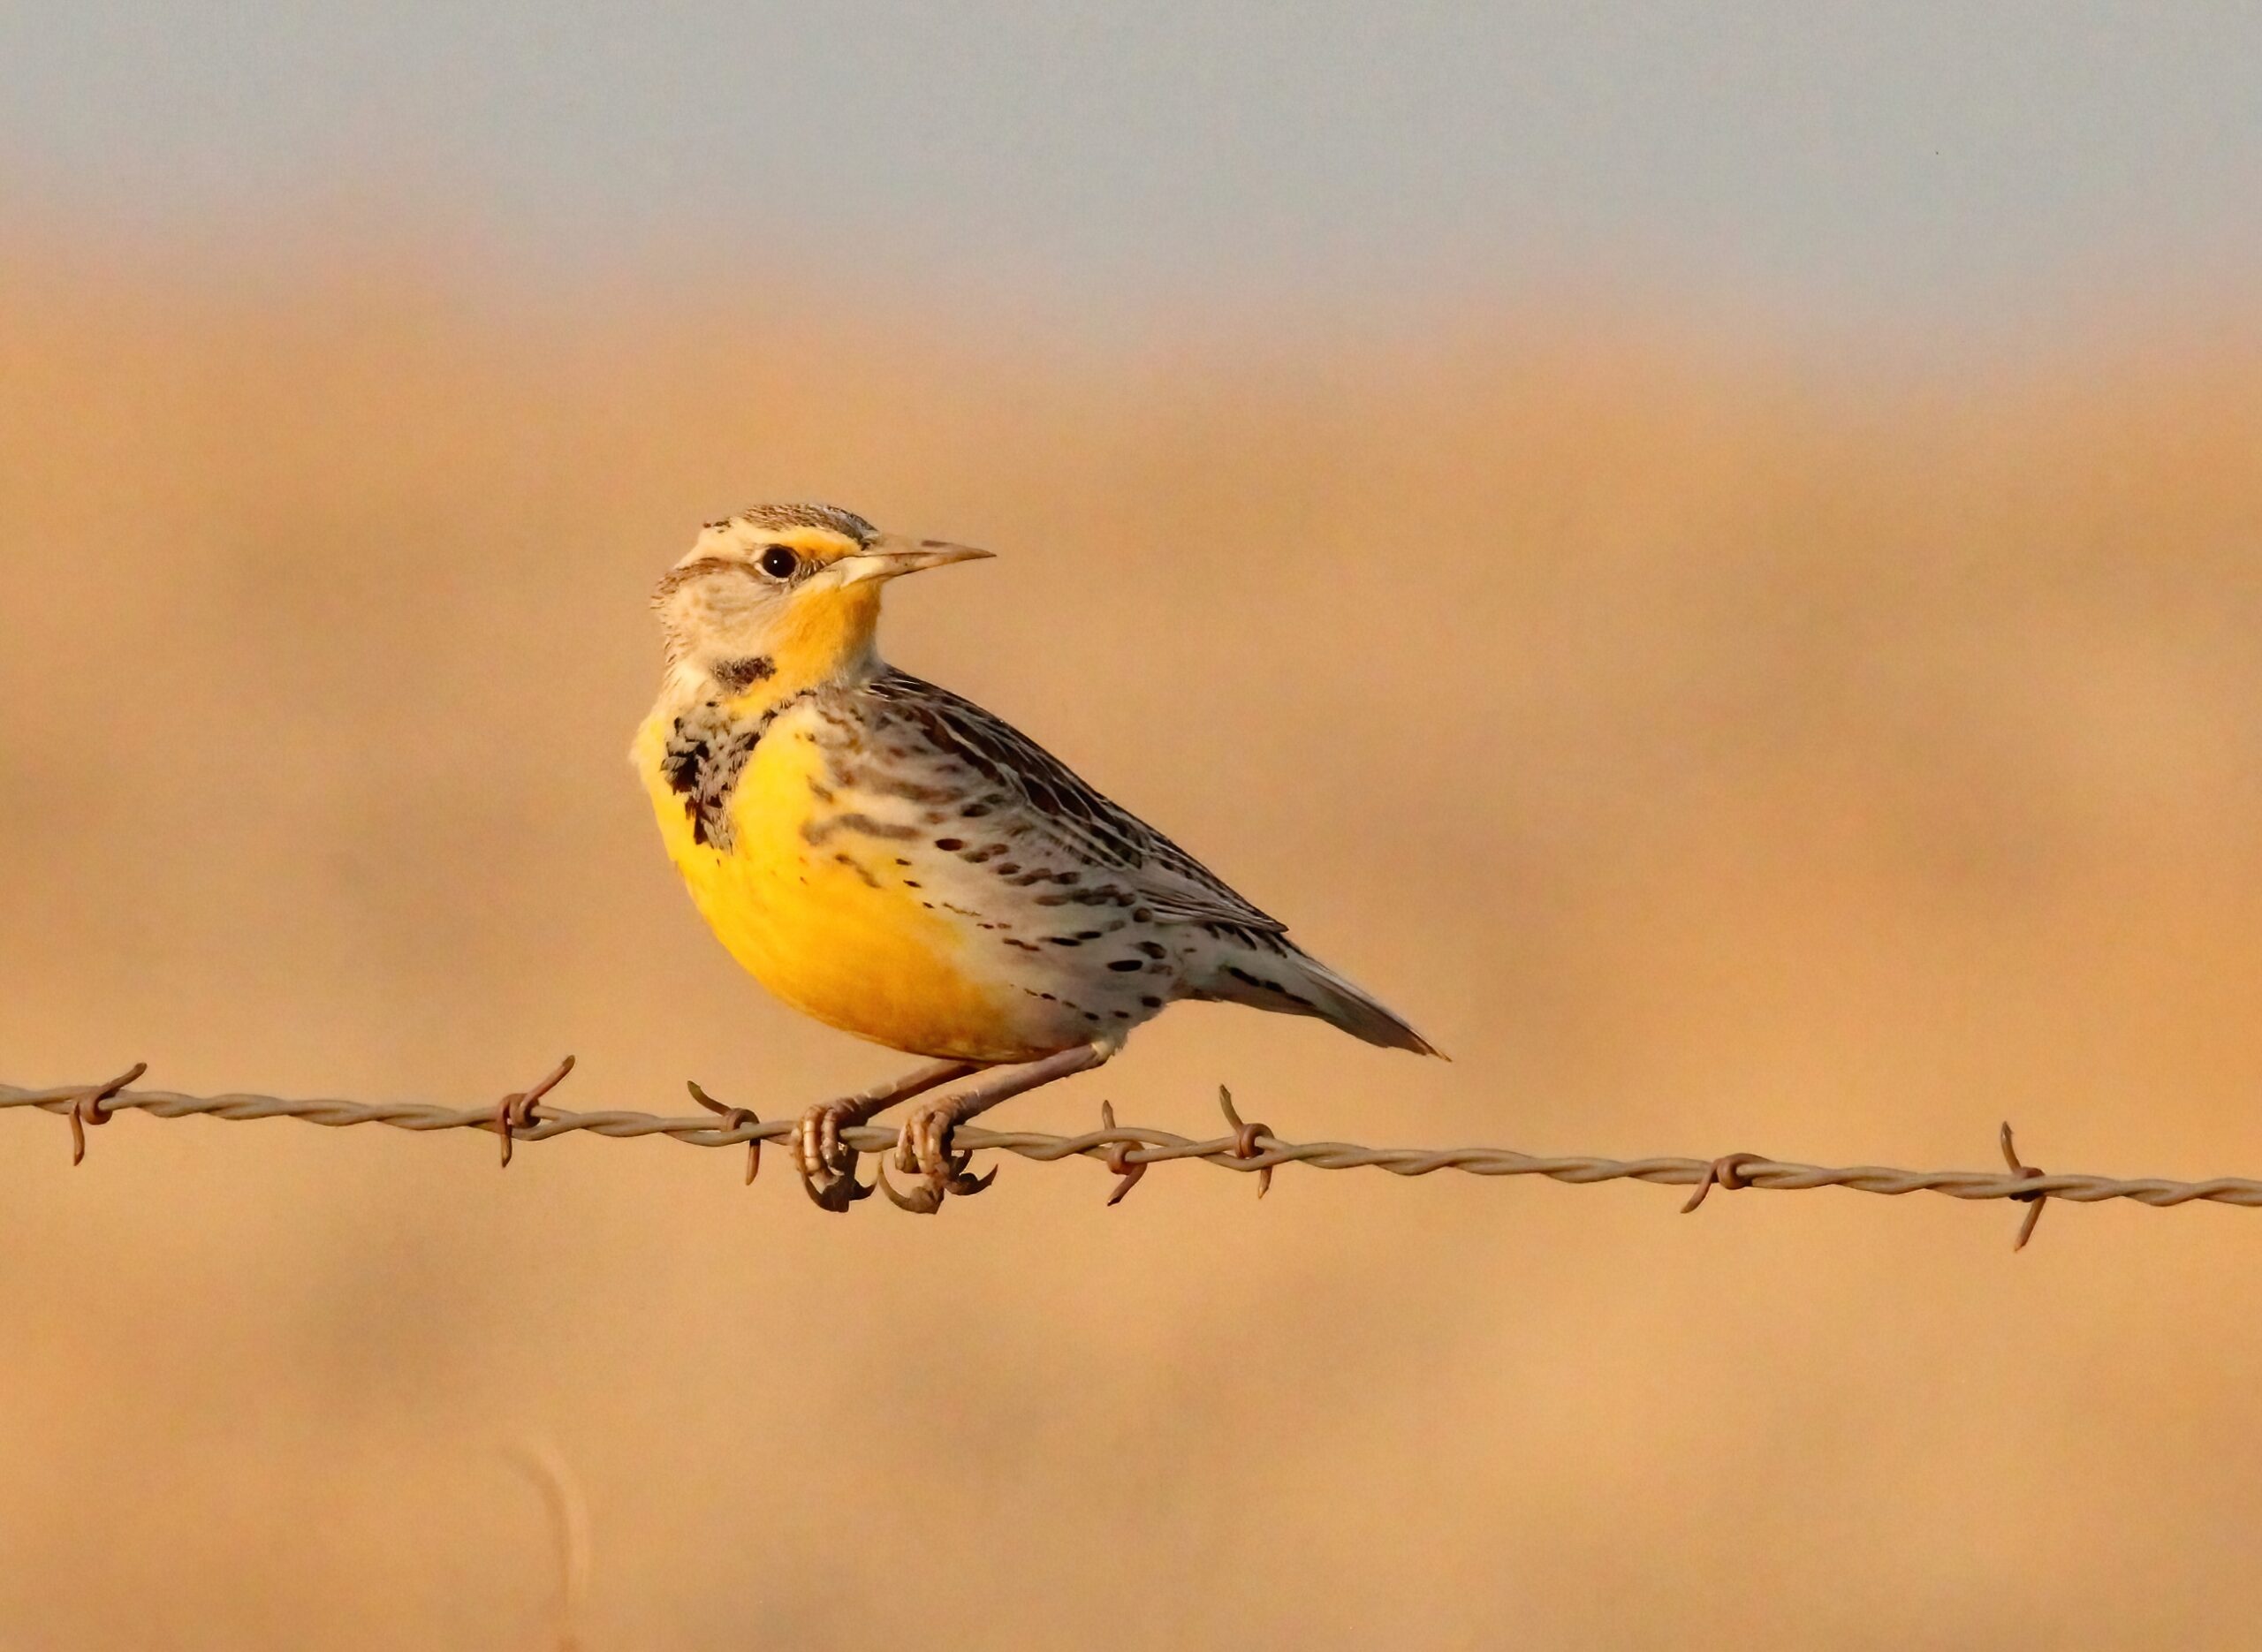 A yellow and brown-gray bird perches on a barbed wire fence.